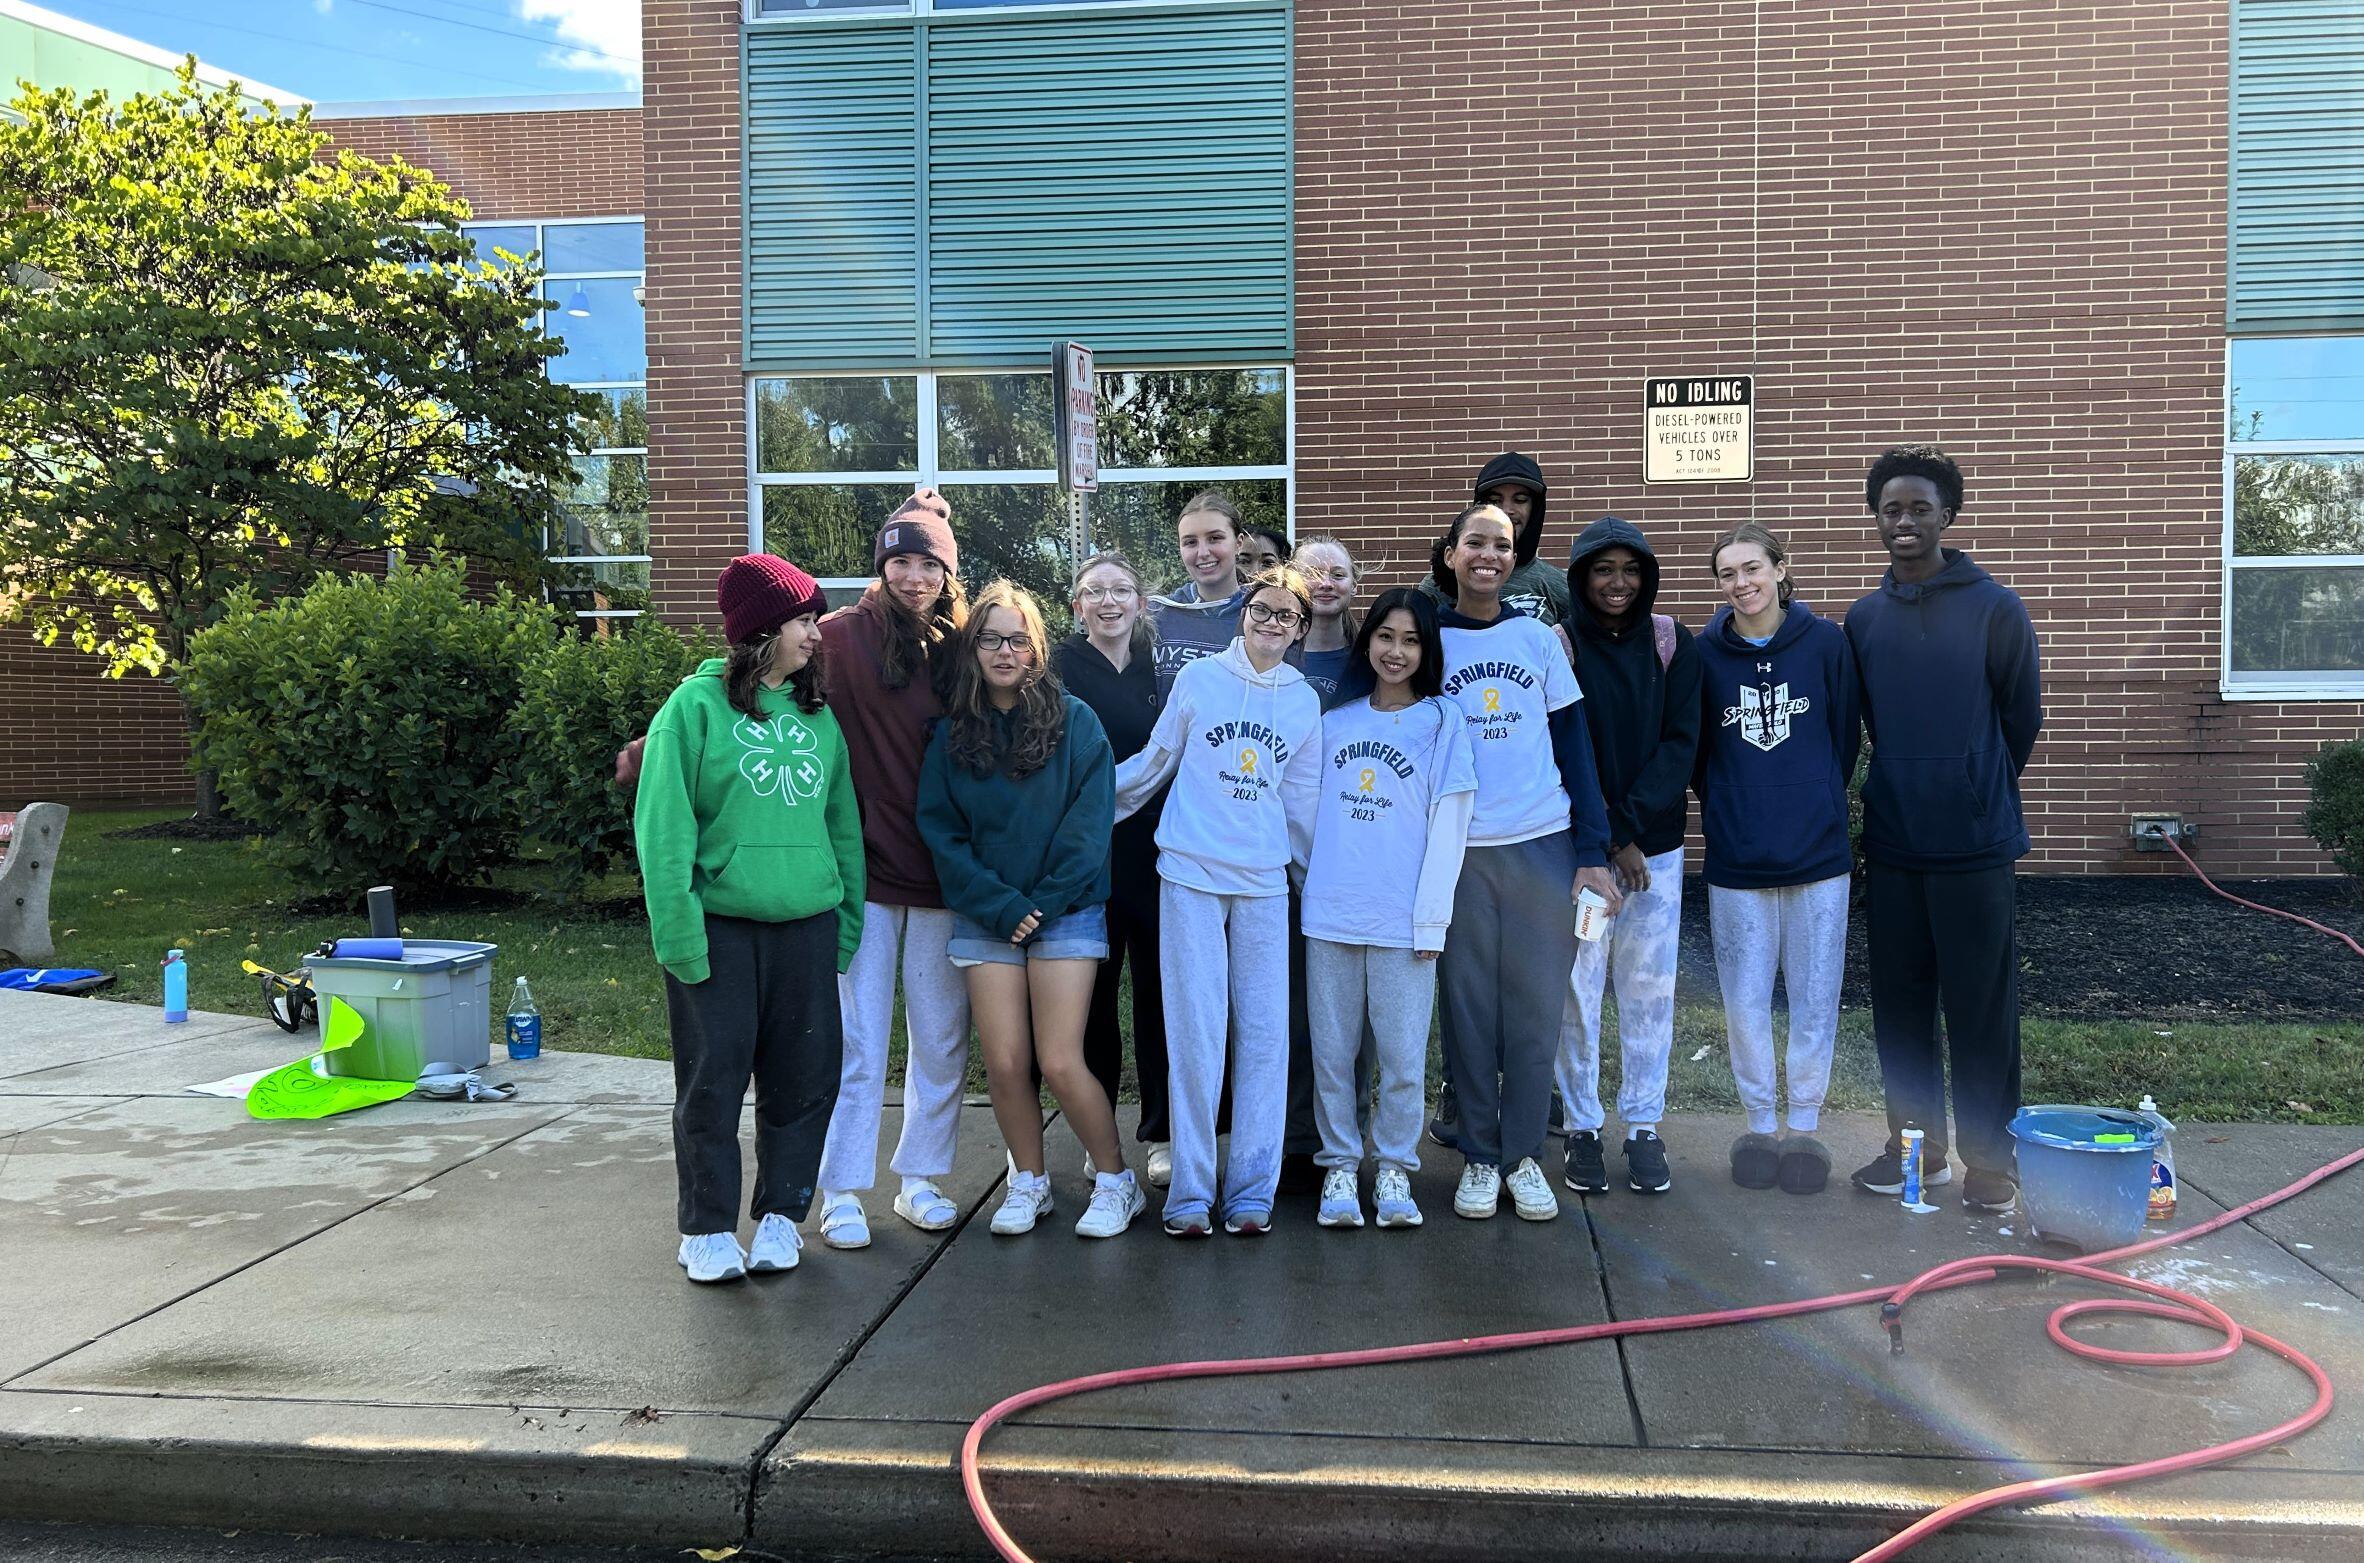 14 Students standing for a group photo. Students had participated in a carwash. There is a hose in front of them on the ground